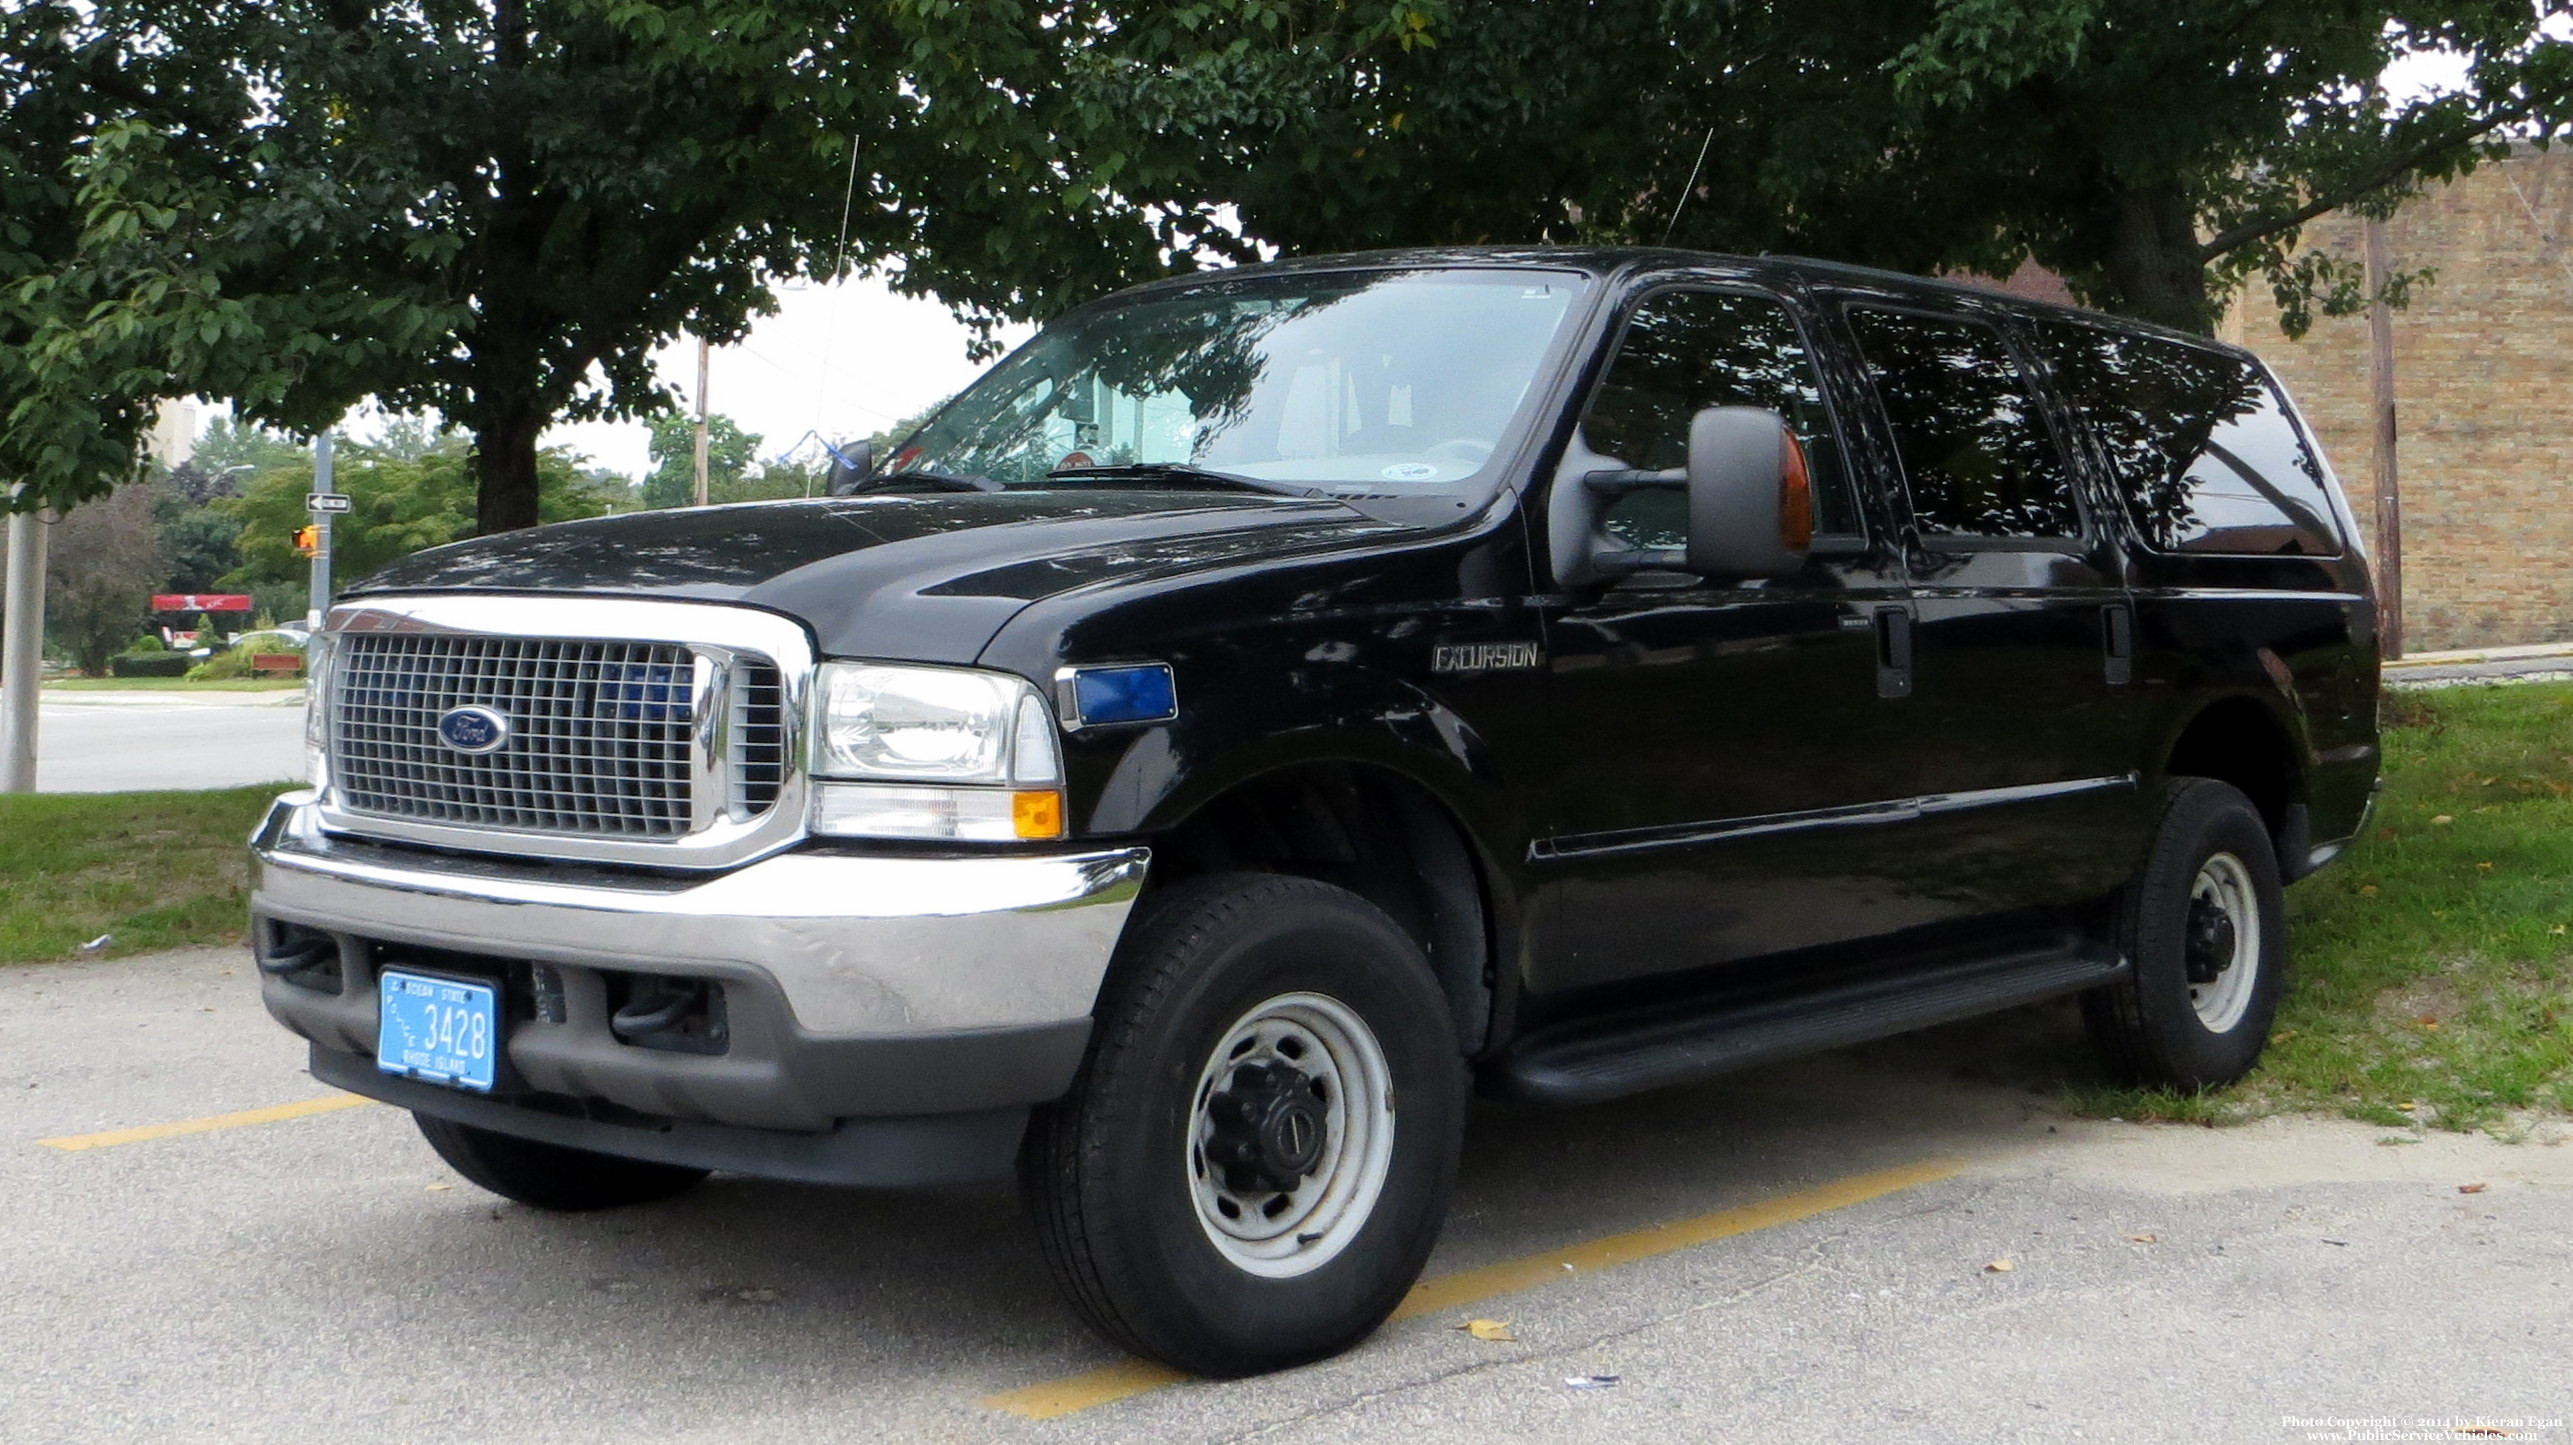 A photo  of Woonsocket Police
            Unmarked Unit, a 2000-2004 Ford Excursion             taken by Kieran Egan